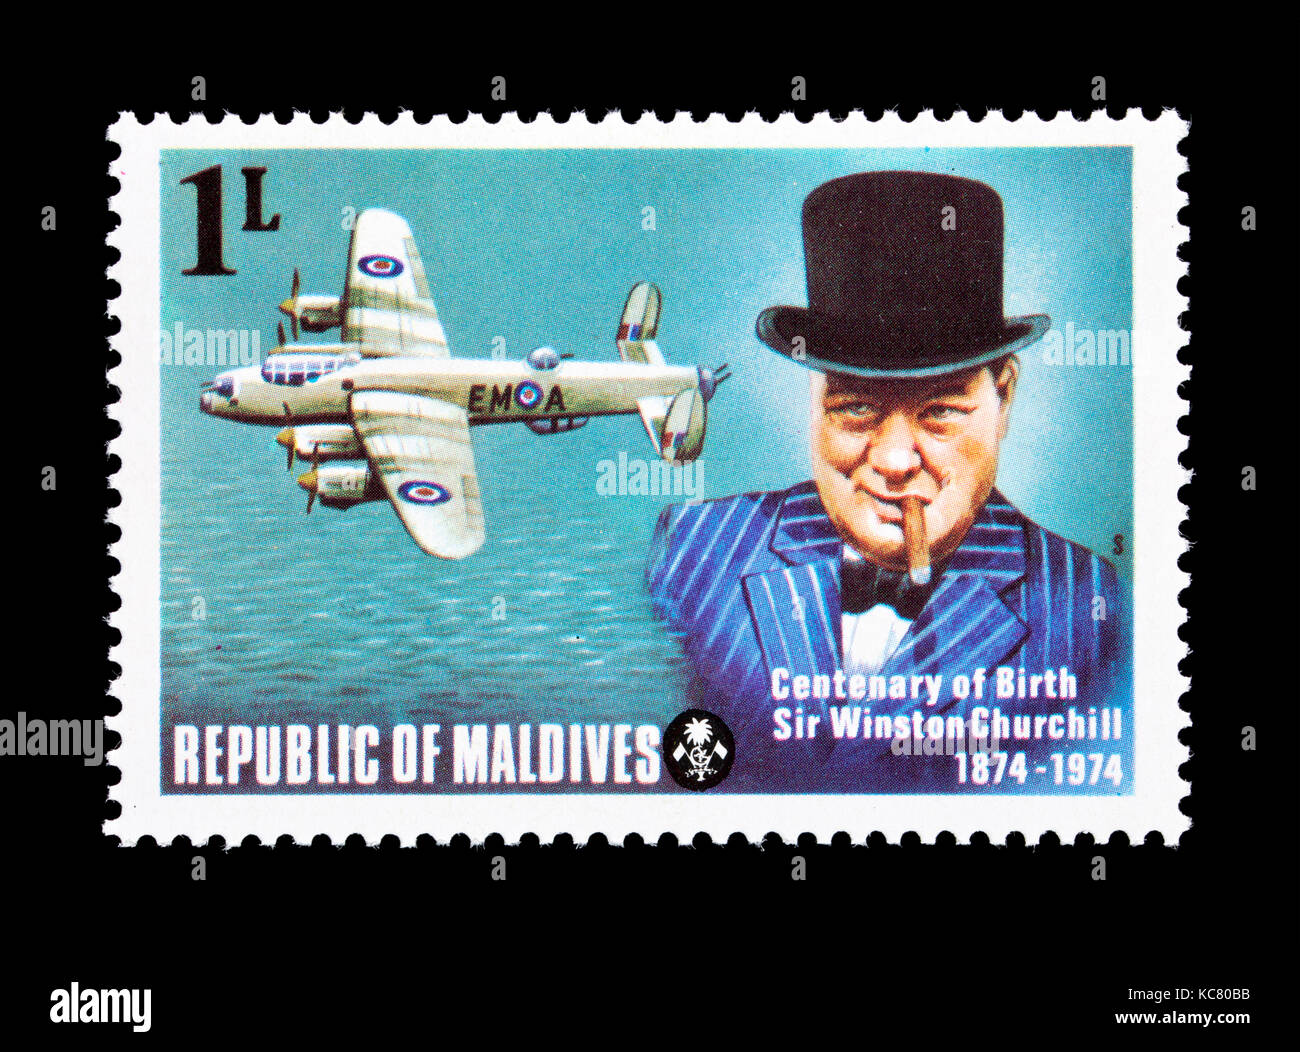 Postage stamp from the Maldives depicting  Winston Churchill and a World War 2 airplane, centennial of birth. Stock Photo